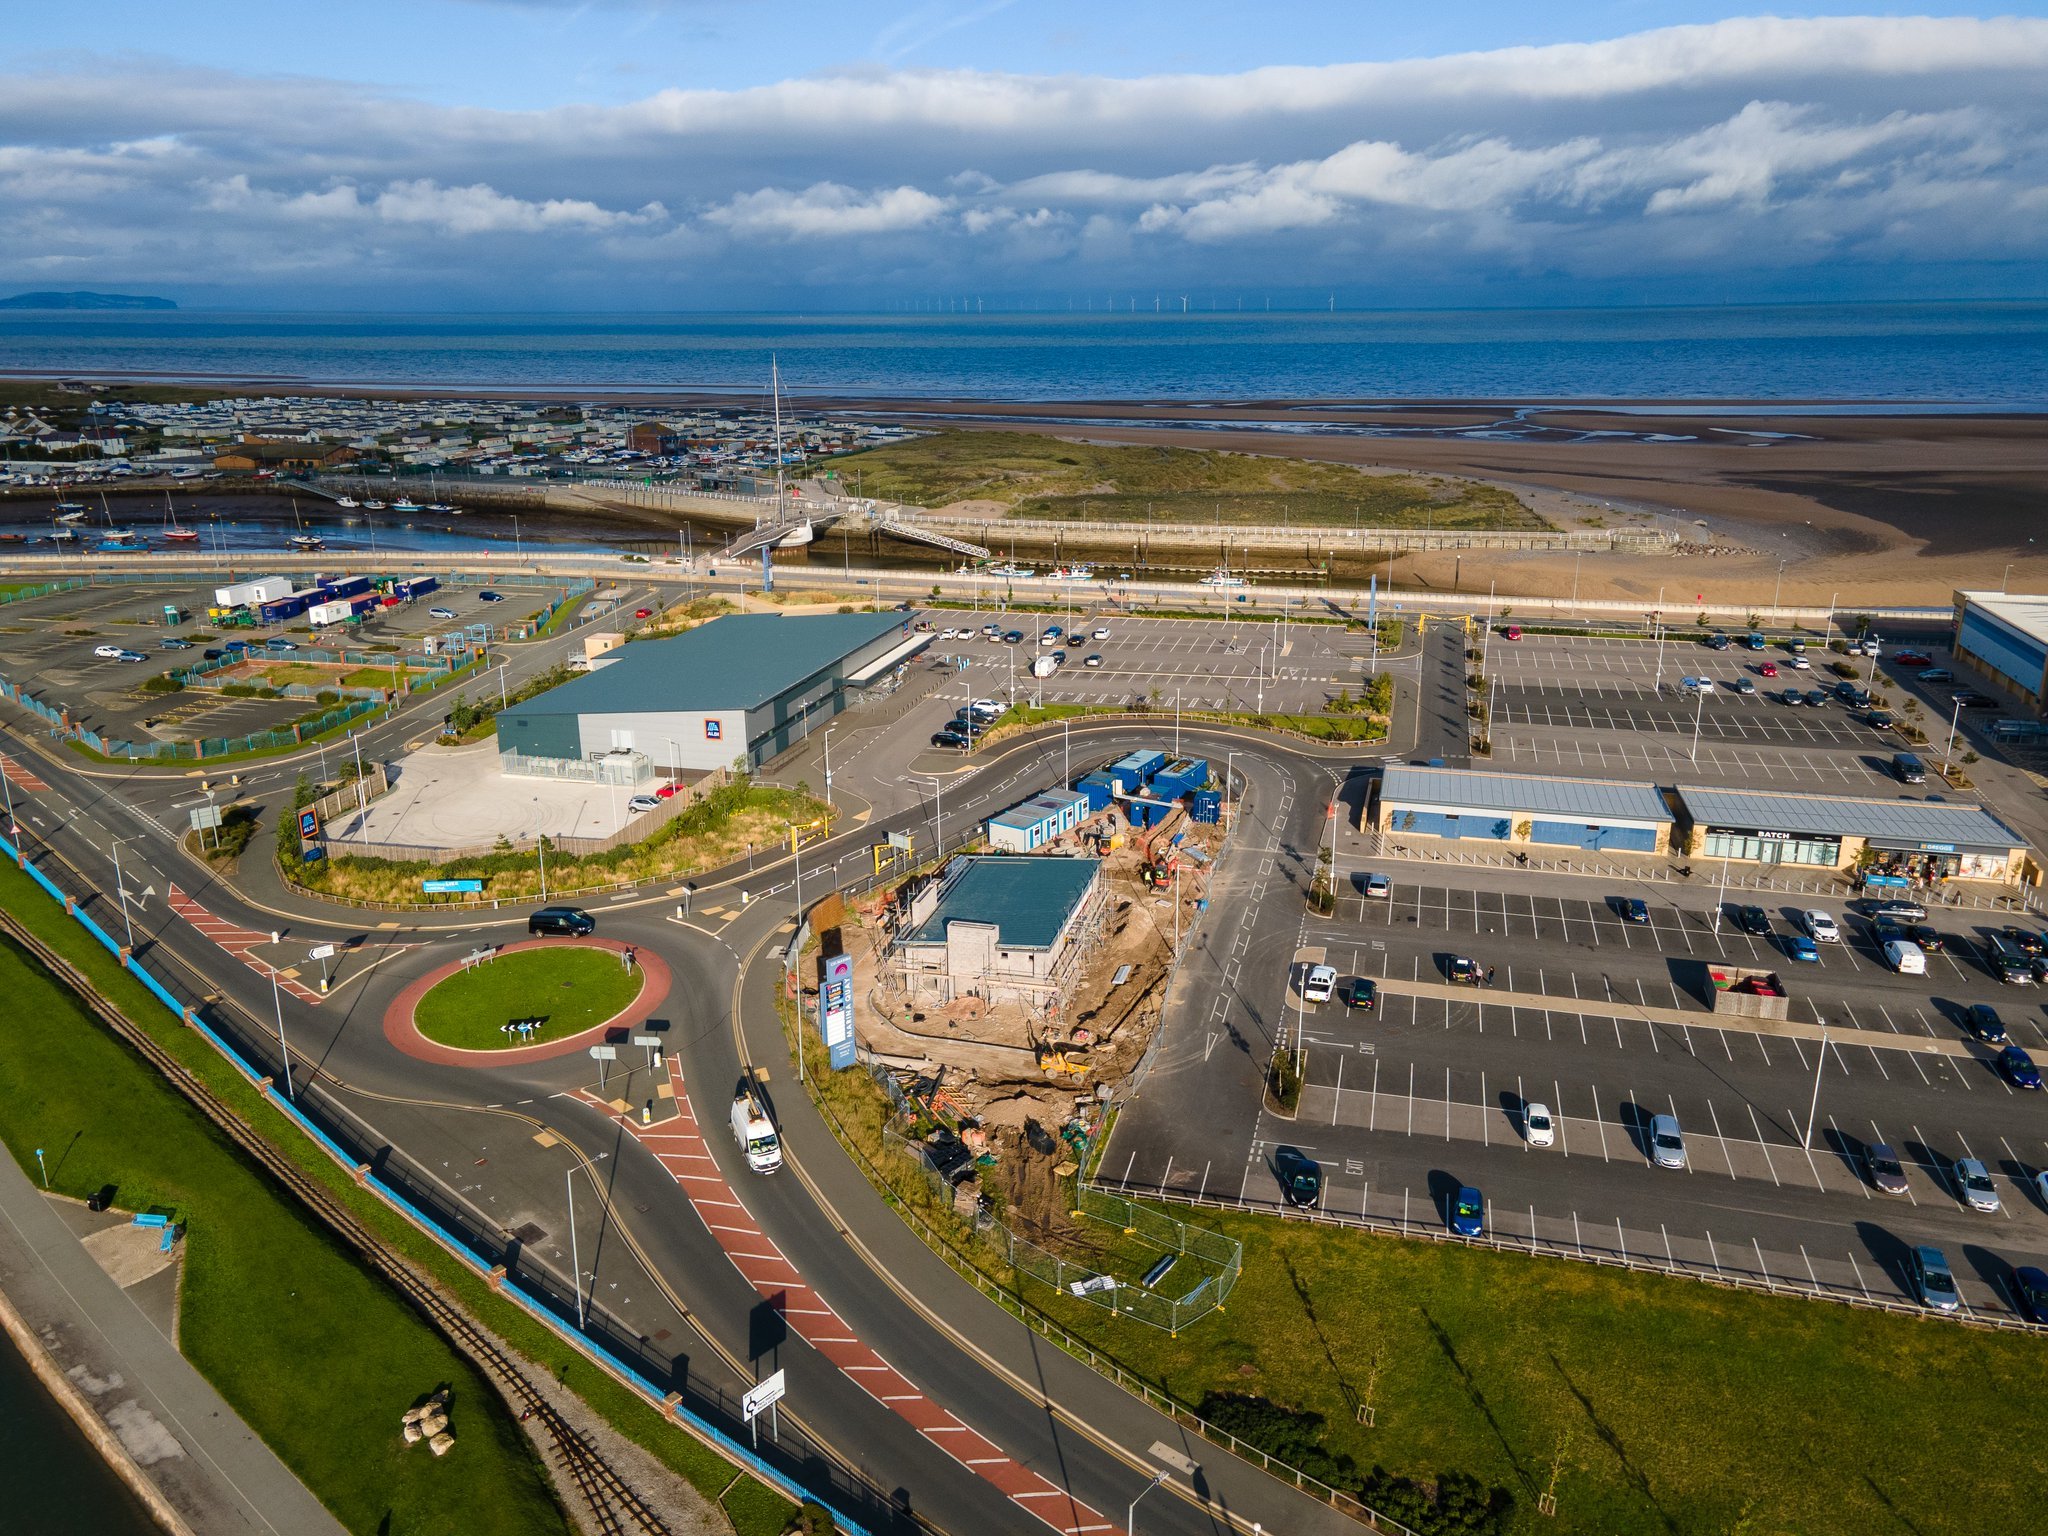 Work to build a Costa Costa on Marina Quay in Rhyl is fully underway. Picture: DronePics.Wales / DronePicsWales - Twitter (Permission granted for images) 